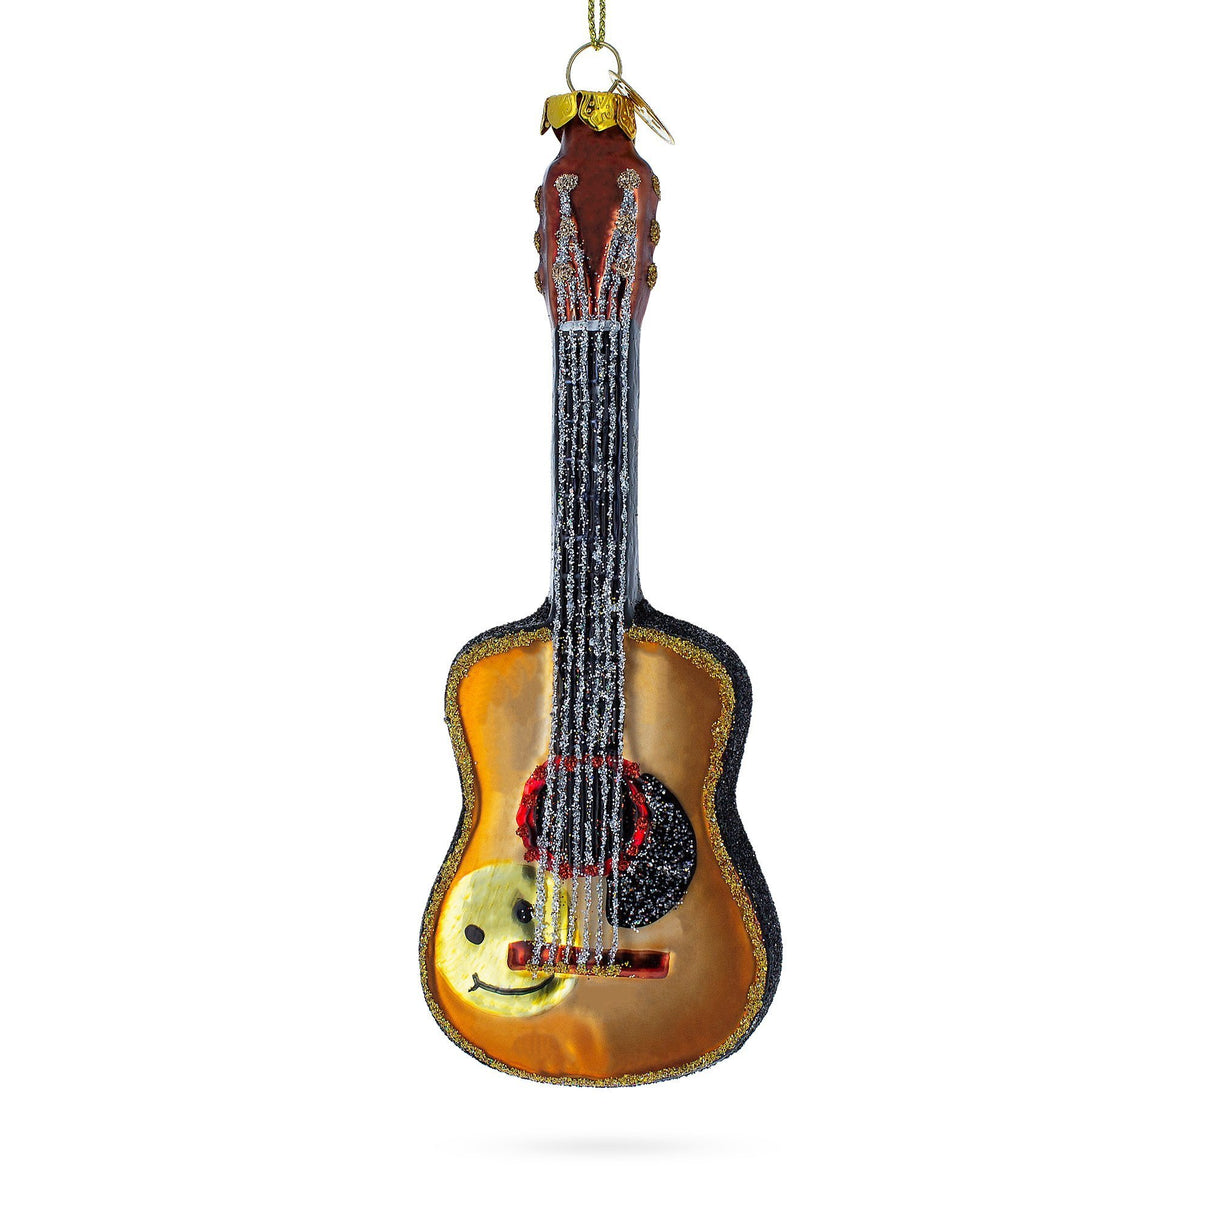 Glass Rocking' Glittered Guitar - Blown Glass Christmas Ornament in Gold color